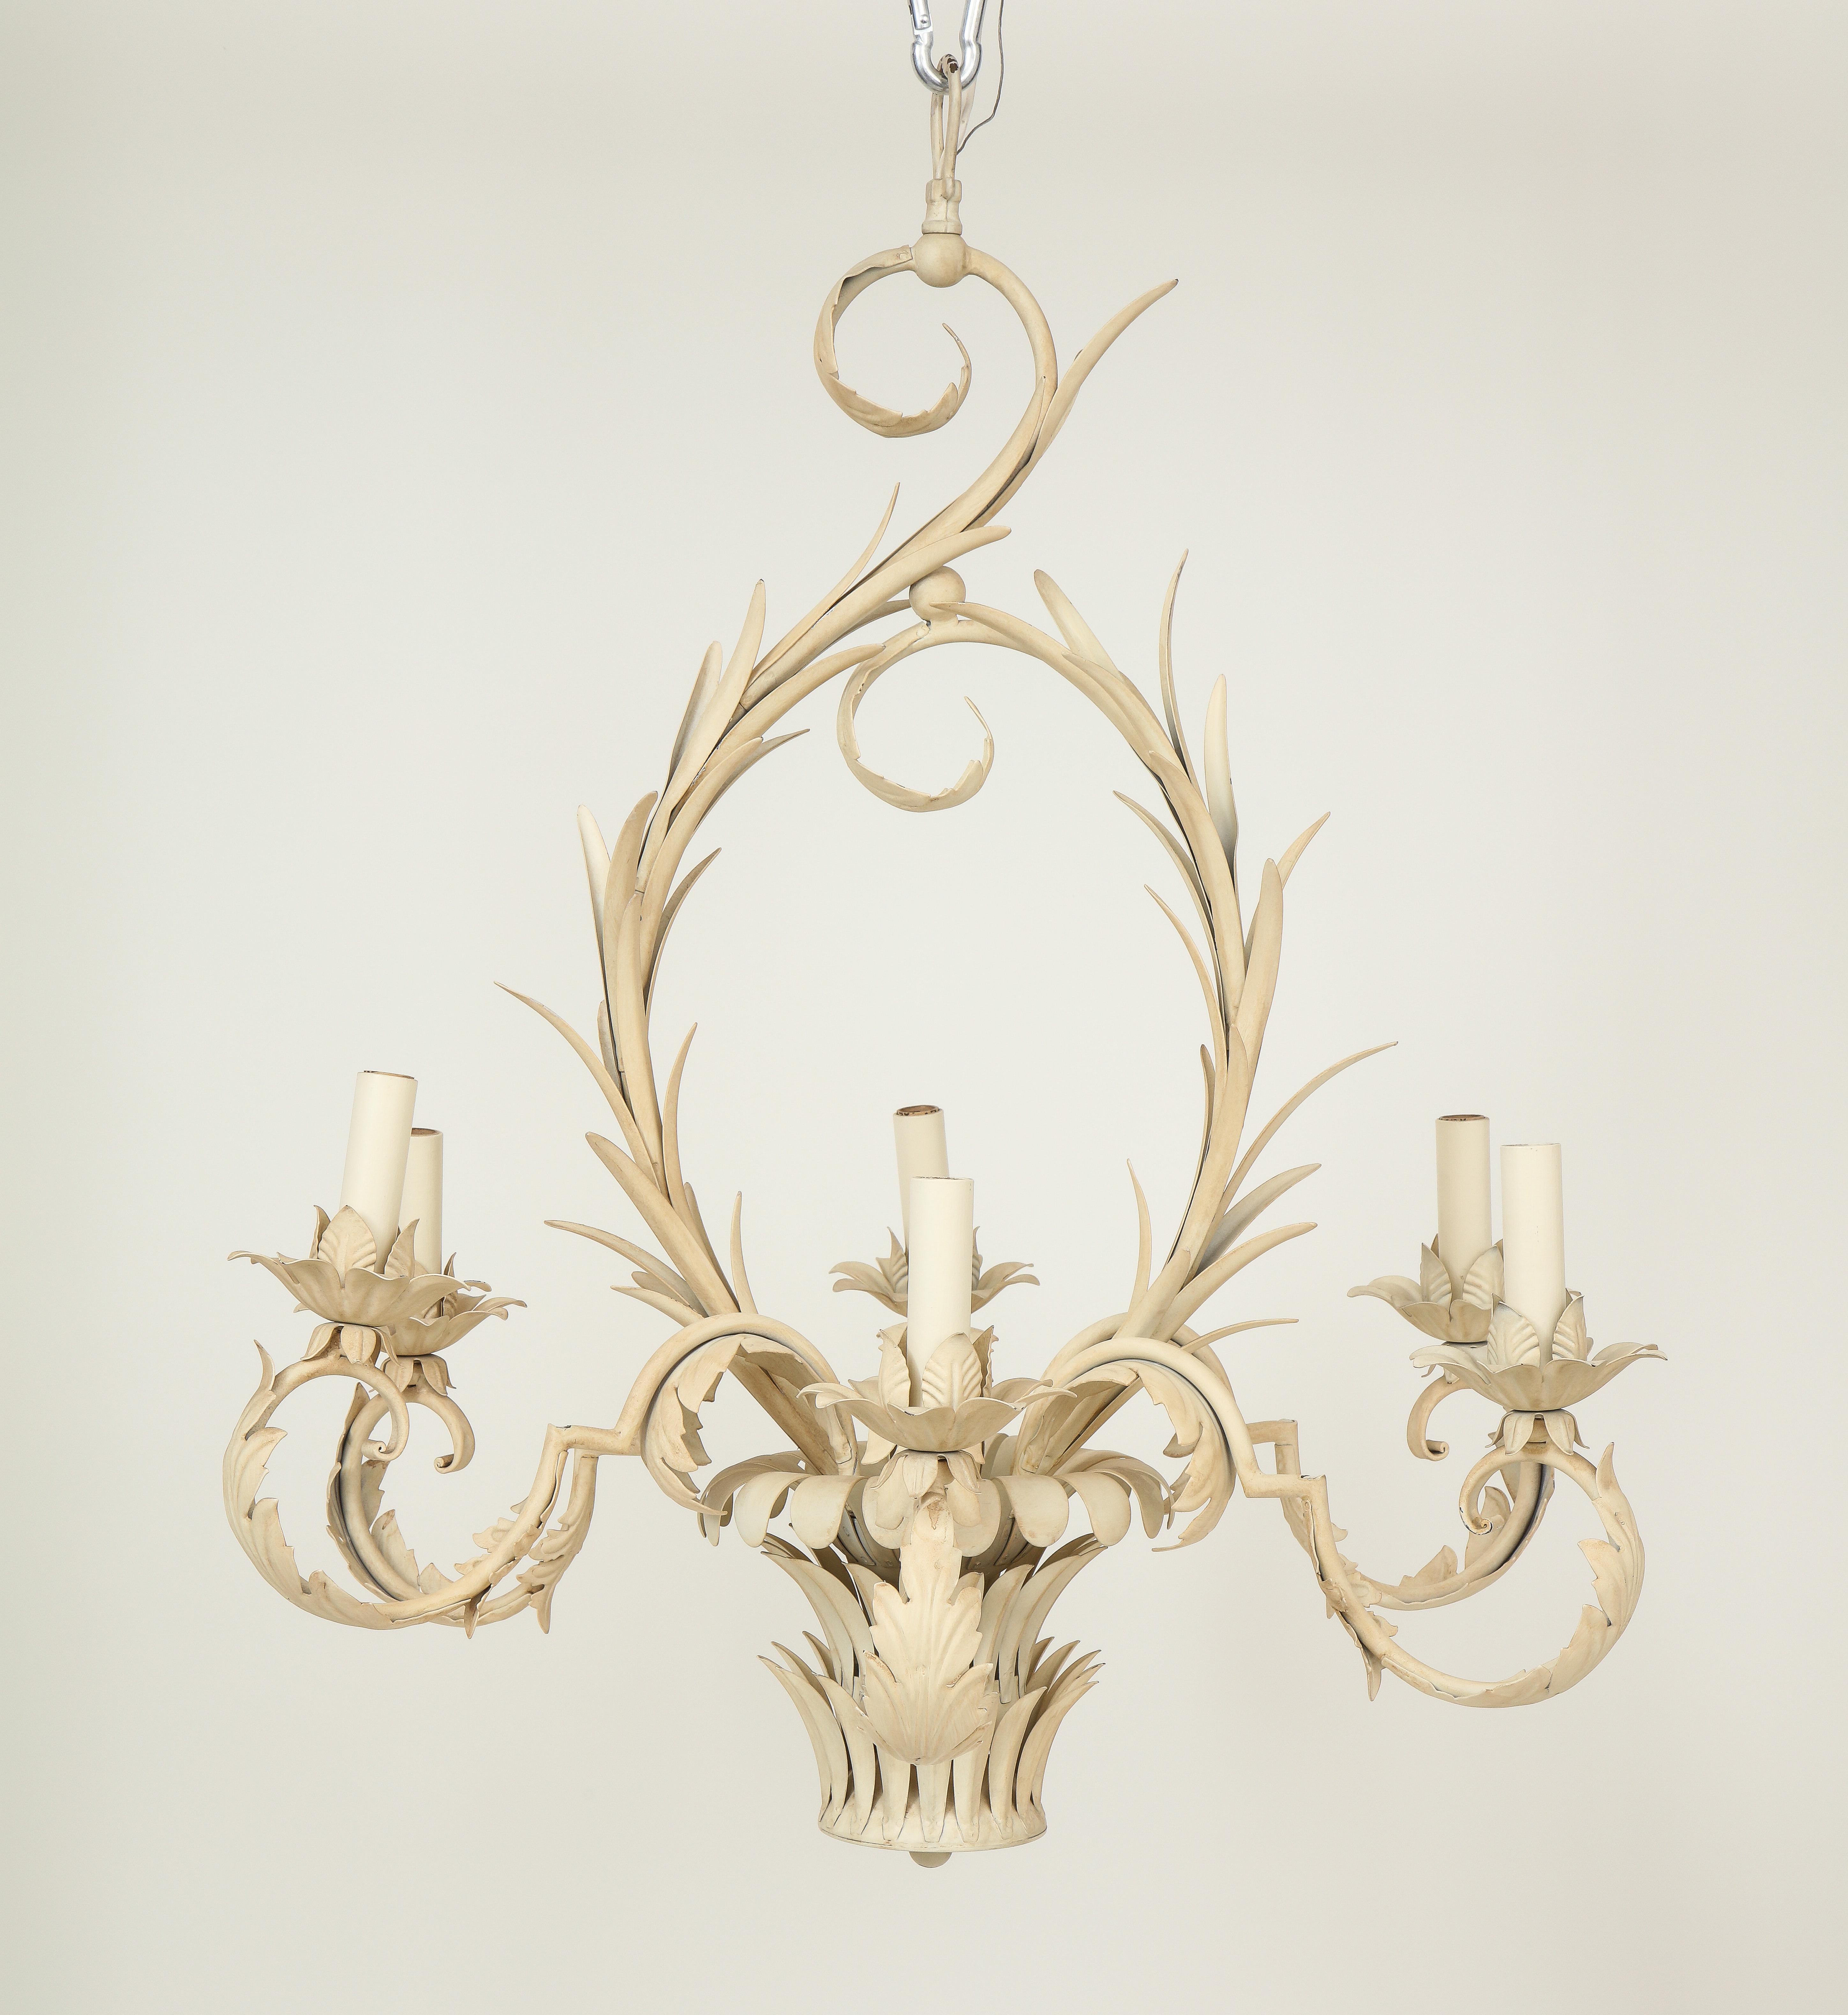 A charming rustic design in the style of Louis XV. In the form of a basket issuing foliate scrolling candlearms suspended from an oval foliate wreath. Comes with small cream-painted canopy.